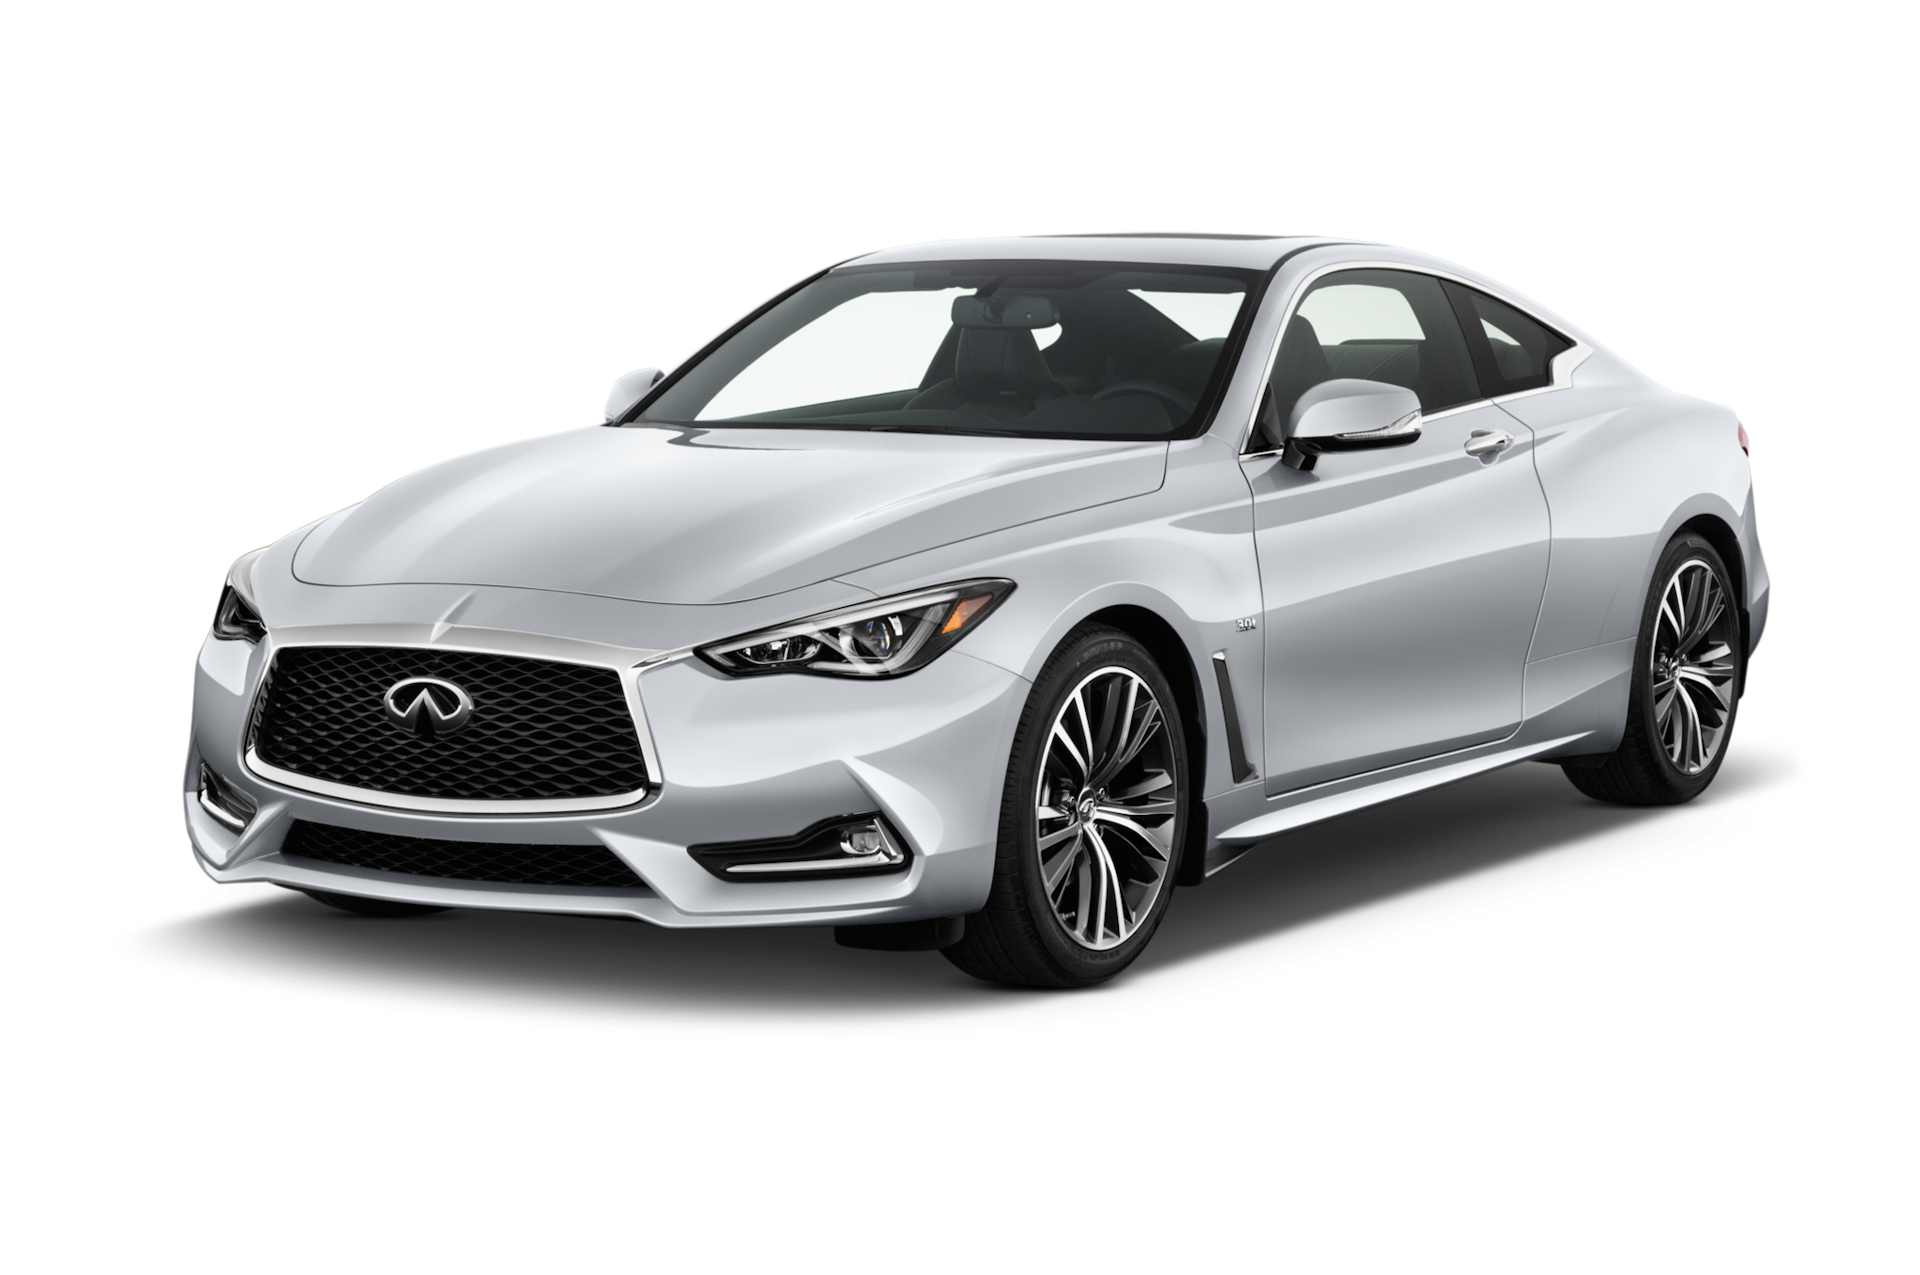 2017 Infiniti Q60 Prices, Reviews, and Photos - MotorTrend